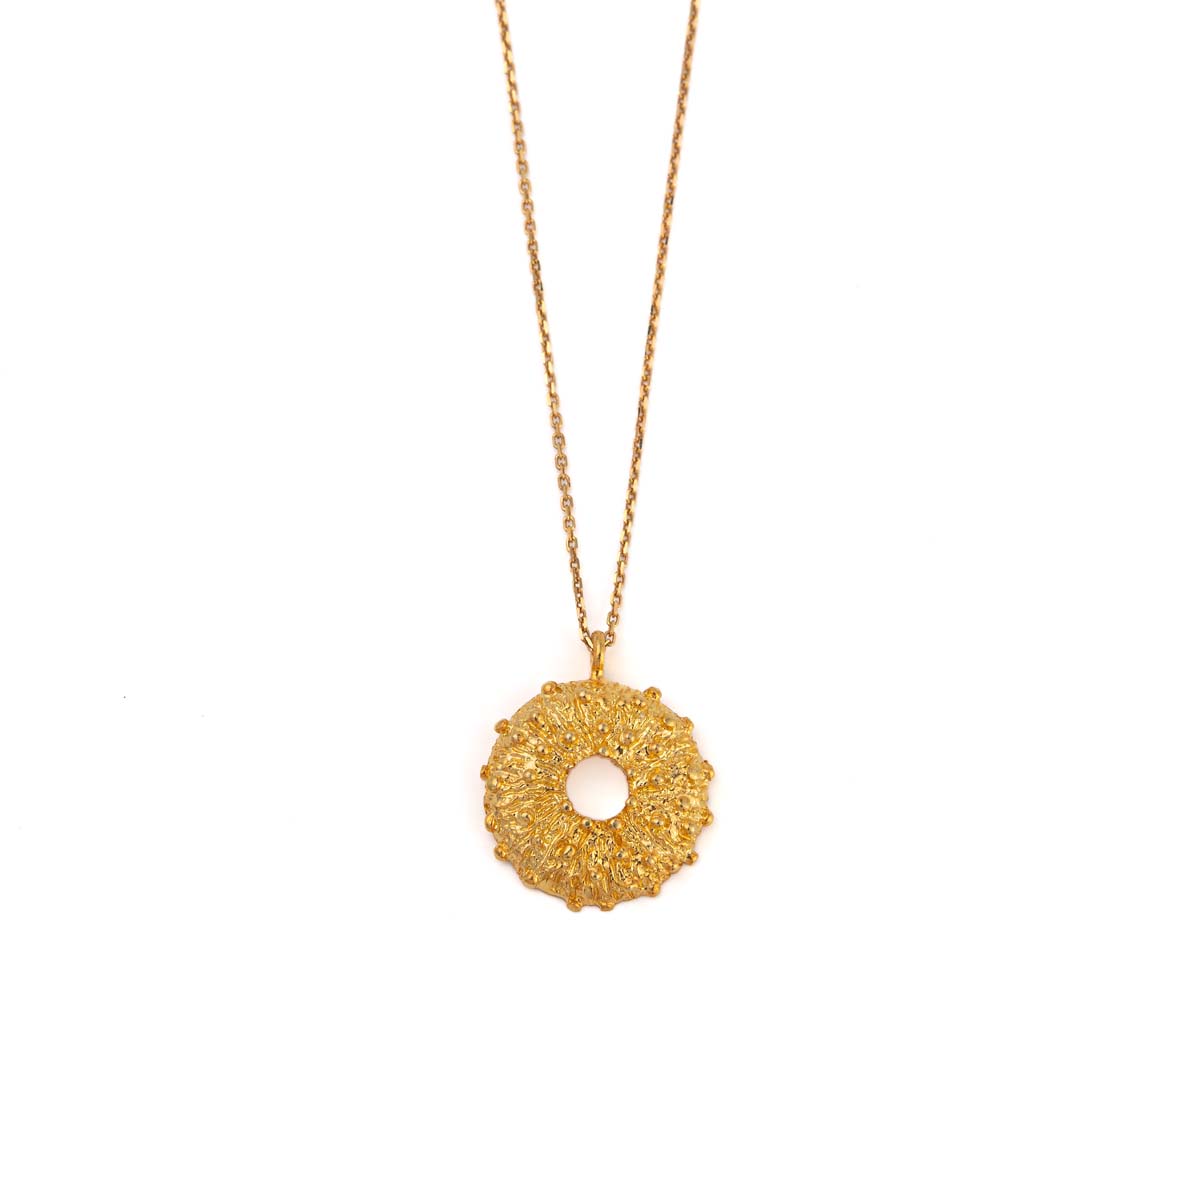 Sea Urchin Necklace – Gold Plated Silver 925